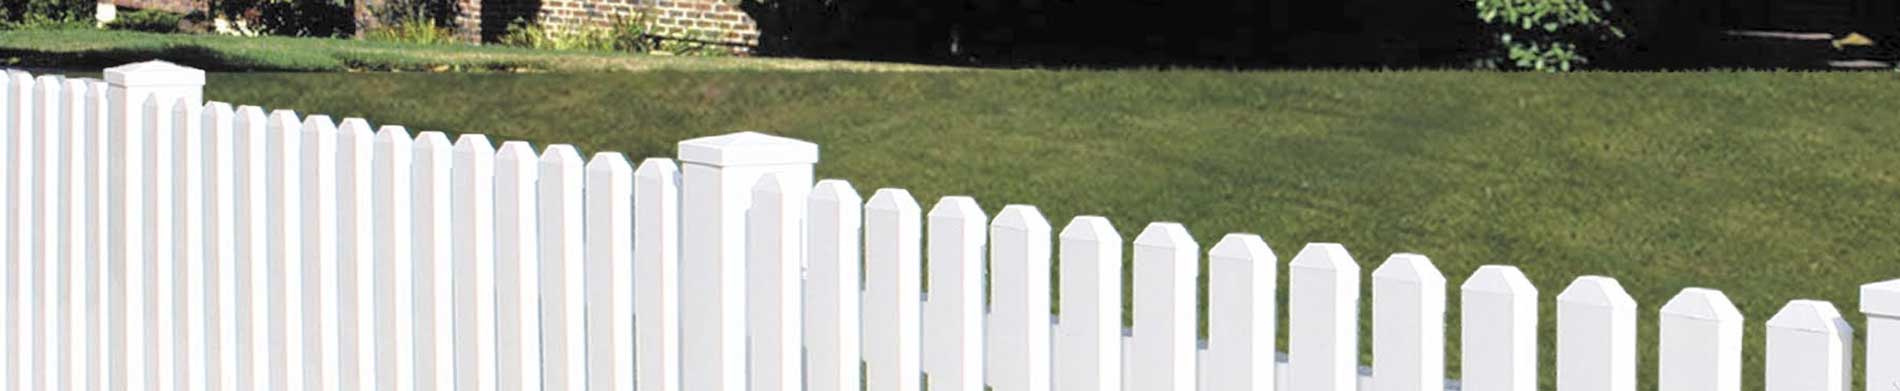 Installing a vinyl fence to beautify your home and add security to it